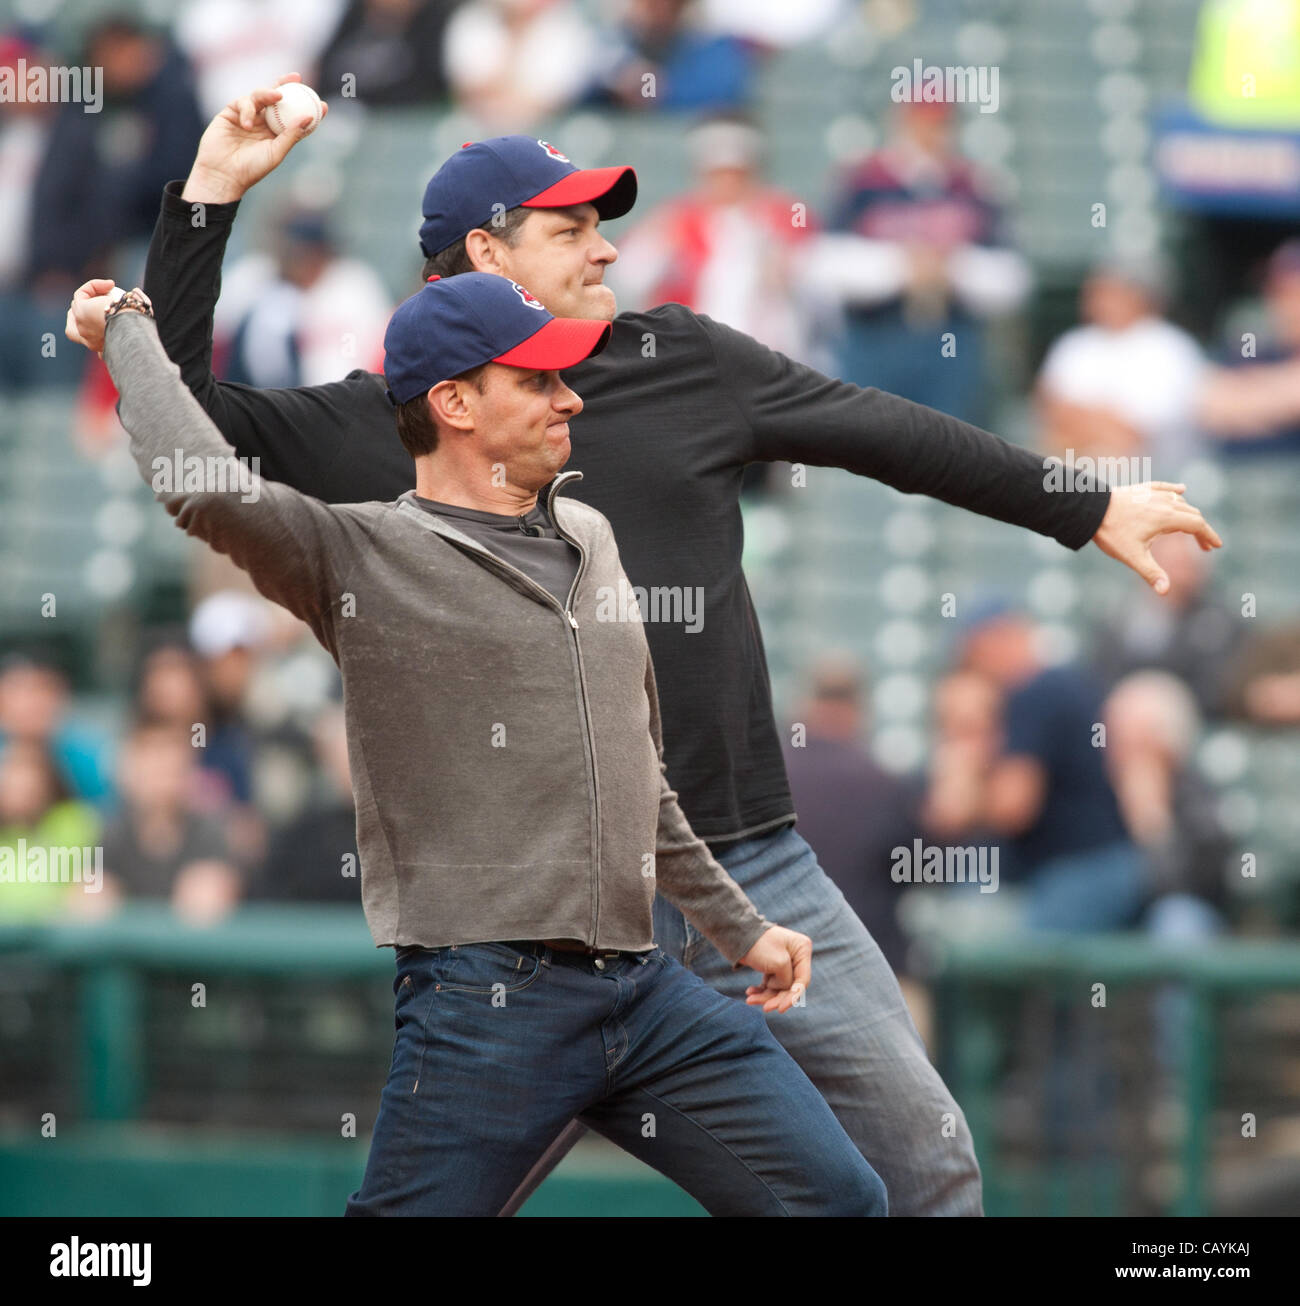 CLEVELAND, OH USA - MAY 8:  ESPN's Mike Greenberg and Mike Golic throw out the first pitches at Progressive Field in Cleveland, OH, USA on Tuesday, May 8, 2012. Stock Photo